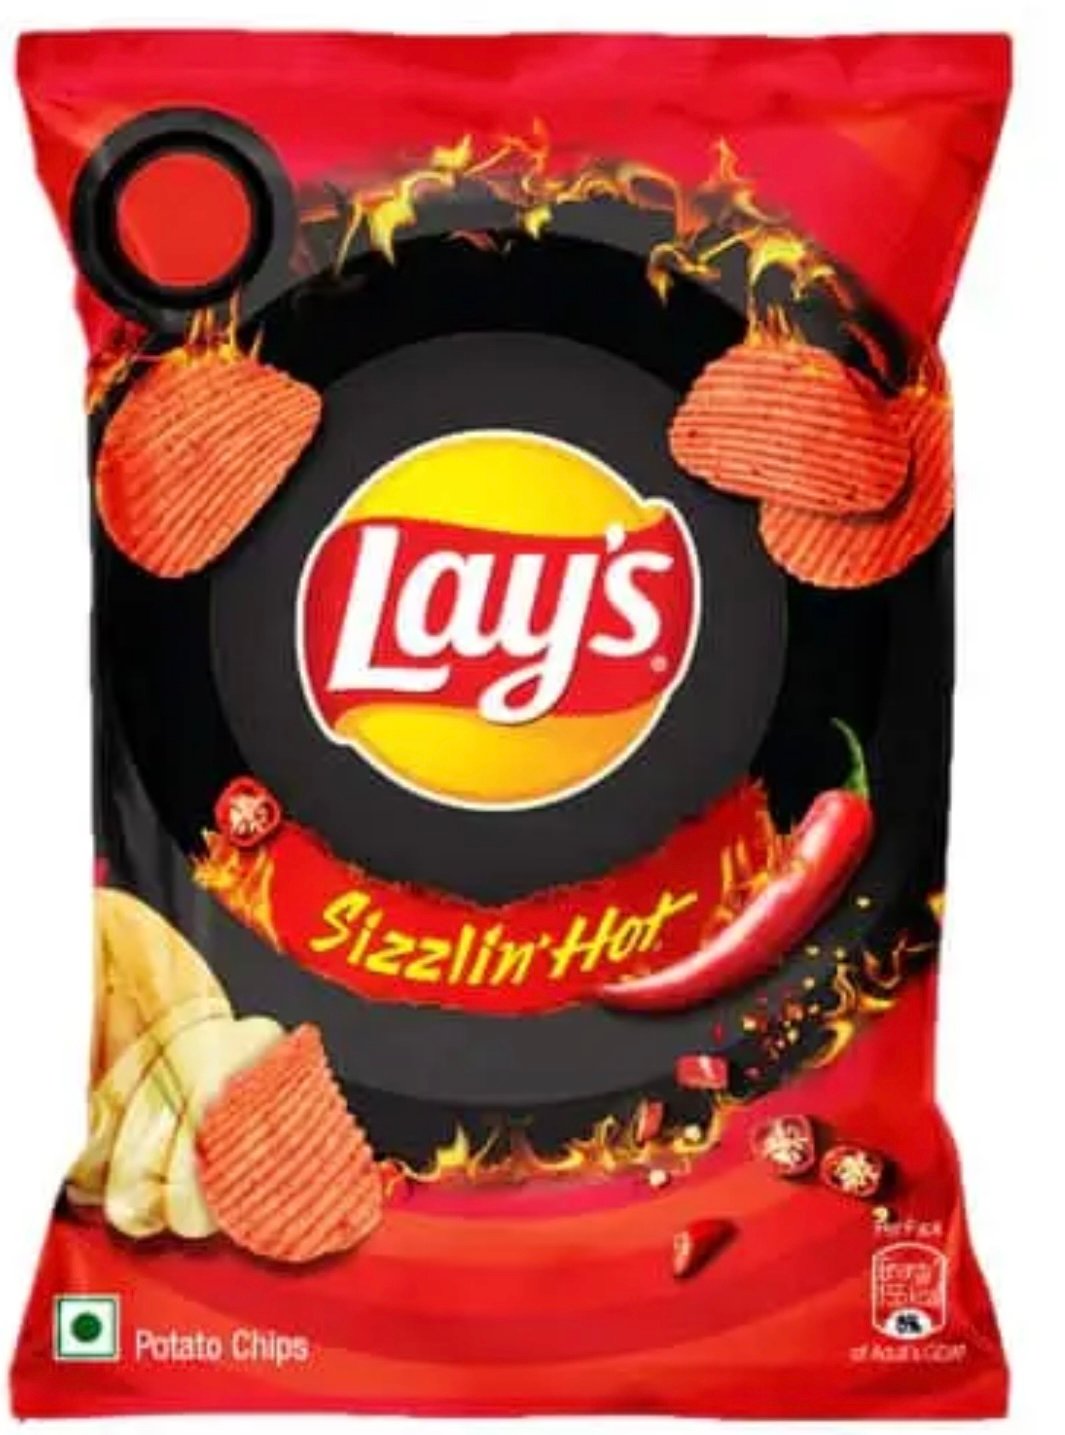 Lays Sizzlin Hot Crisps 50g (Pack of 10)